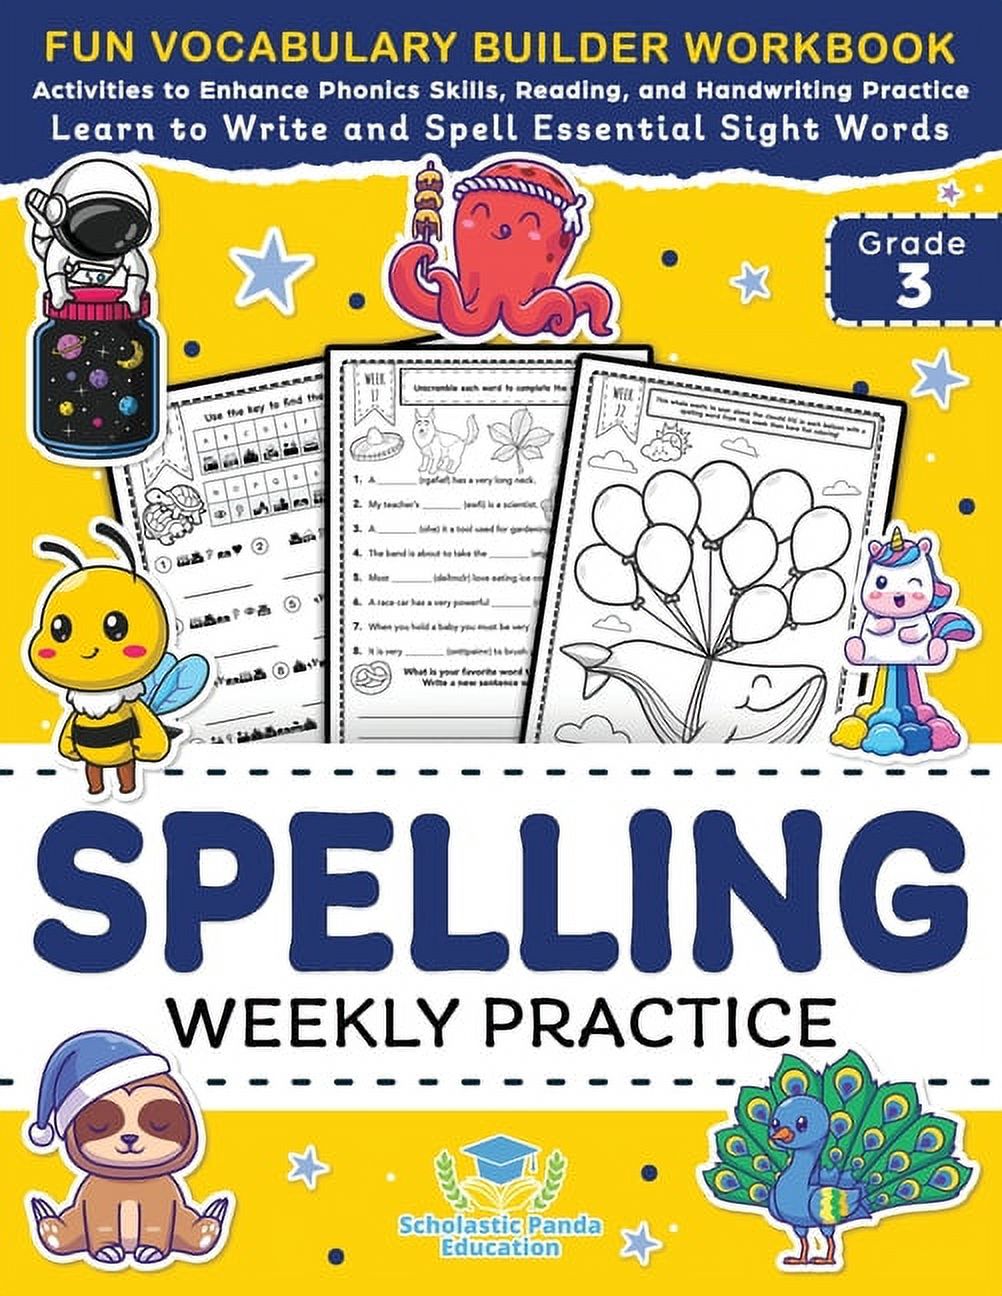 Write　Learn　and　Vocabulary　Vowels　Practice　for　3rd　Elementary　Phonics　to　Builder　Sight　Practice　Essential　Books　and　to　Spell　Grade:　Activities　Handwriting　Kids:　Spelling　with　Workbook　Weekly　for　Words